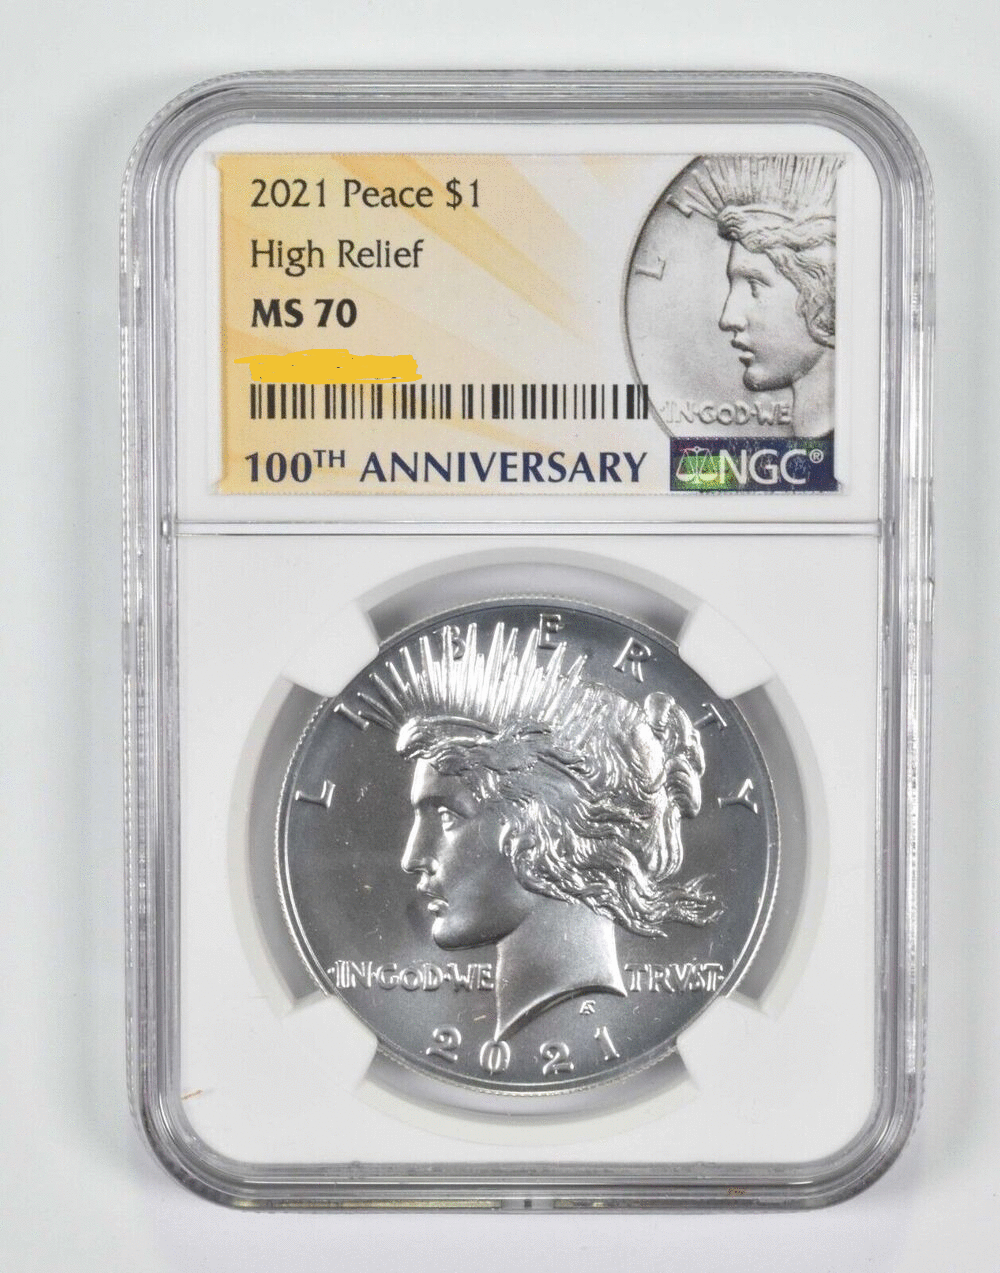 2021 (MS70) Peace Silver Dollar NGC - 1921 Anniversary Year